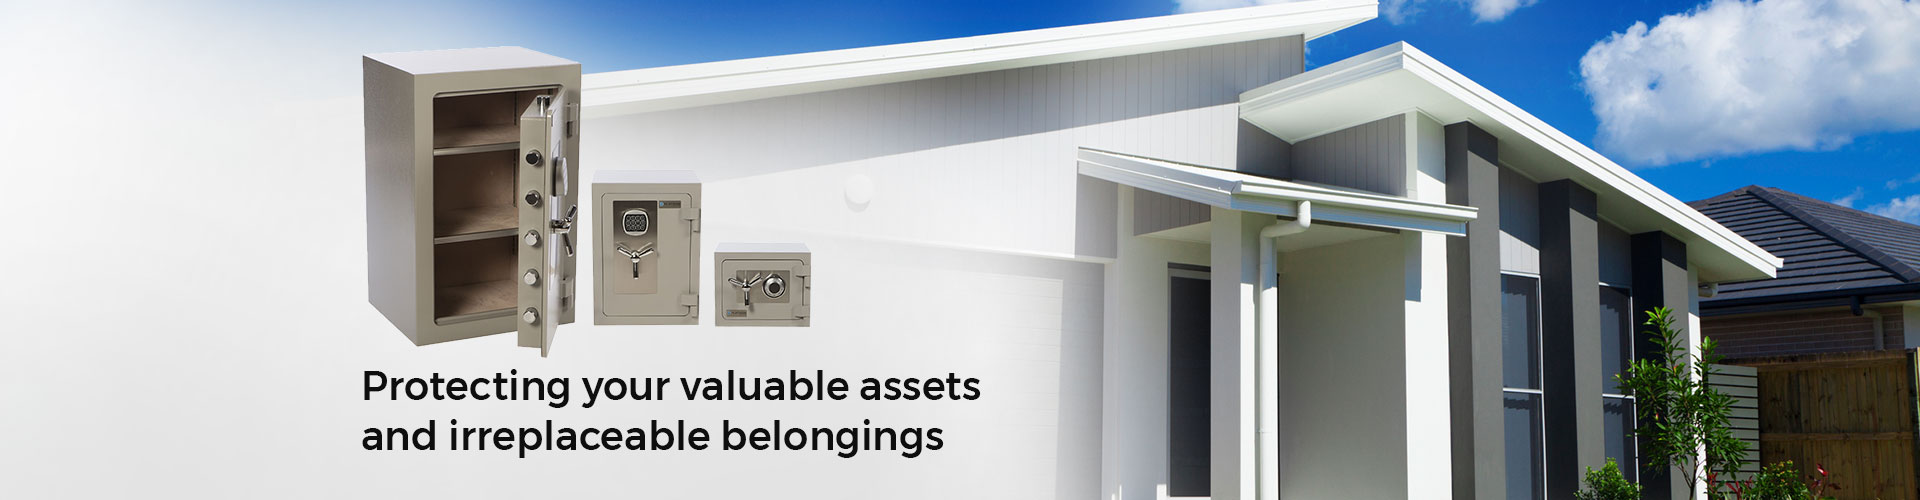 Protecting your valuable assets and irreplaceable belongings